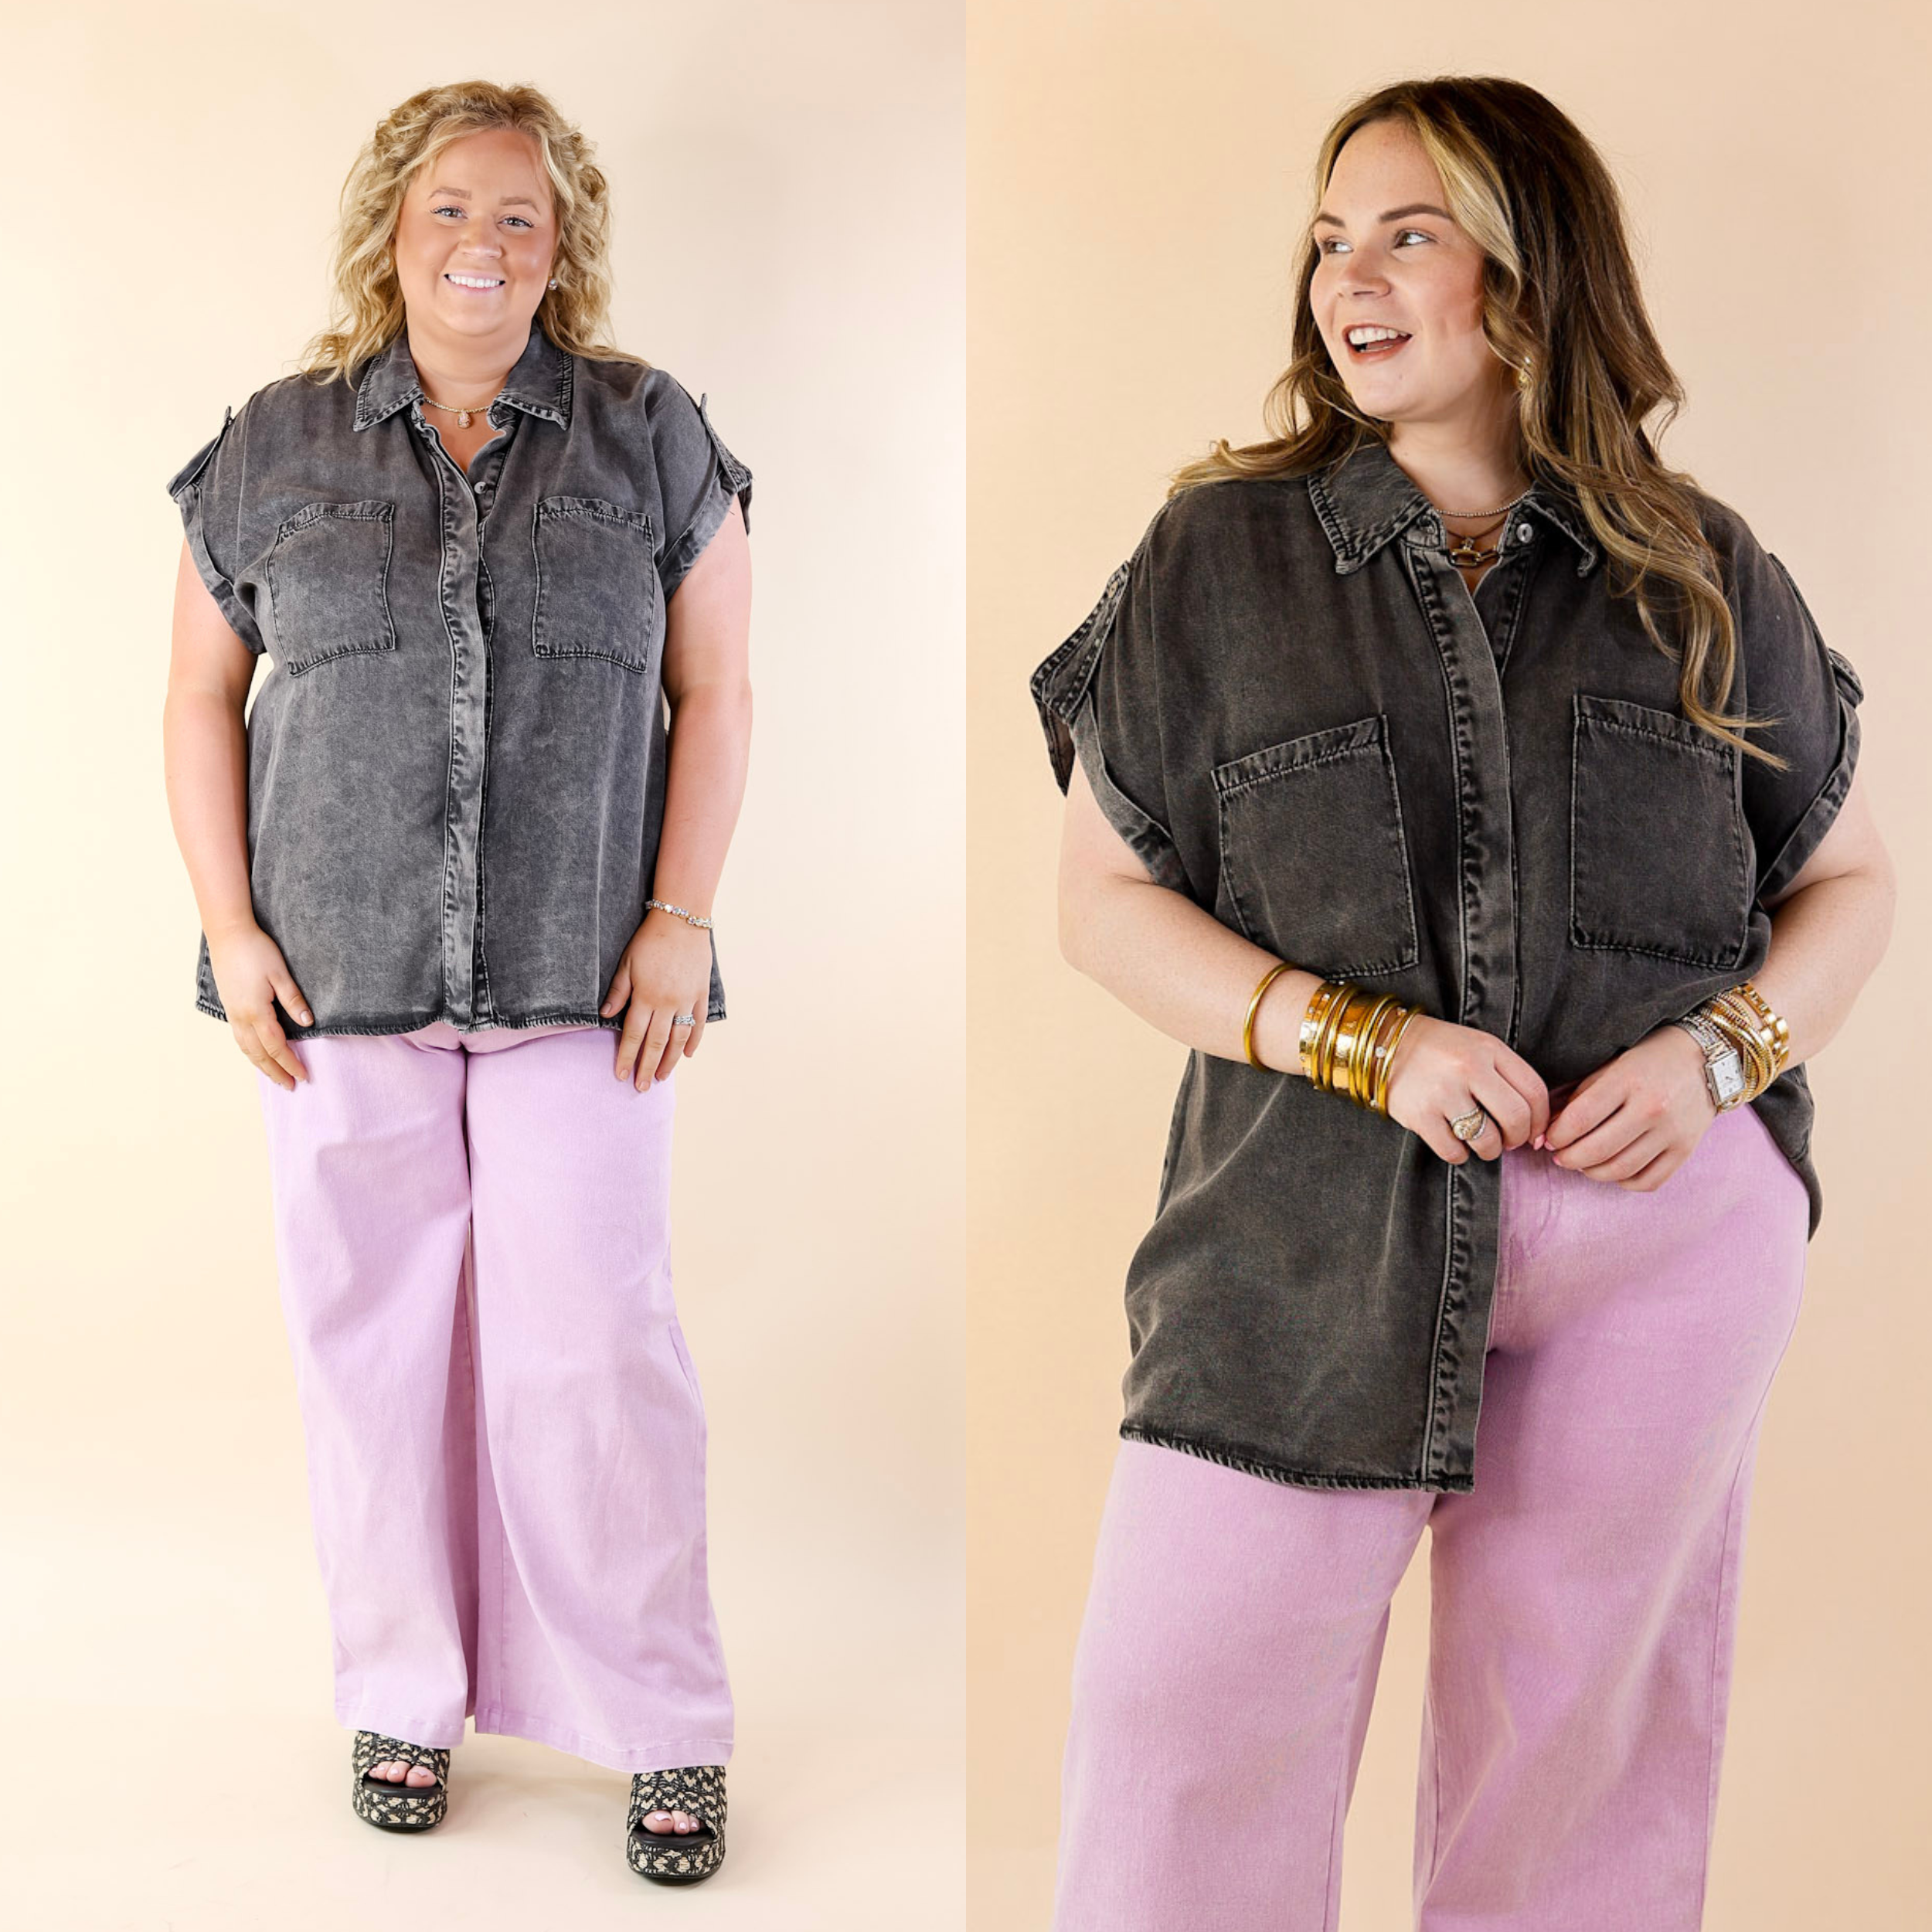 Fast Forward Denim Hidden Button Up Top with Short Sleeves in Black - Giddy Up Glamour Boutique